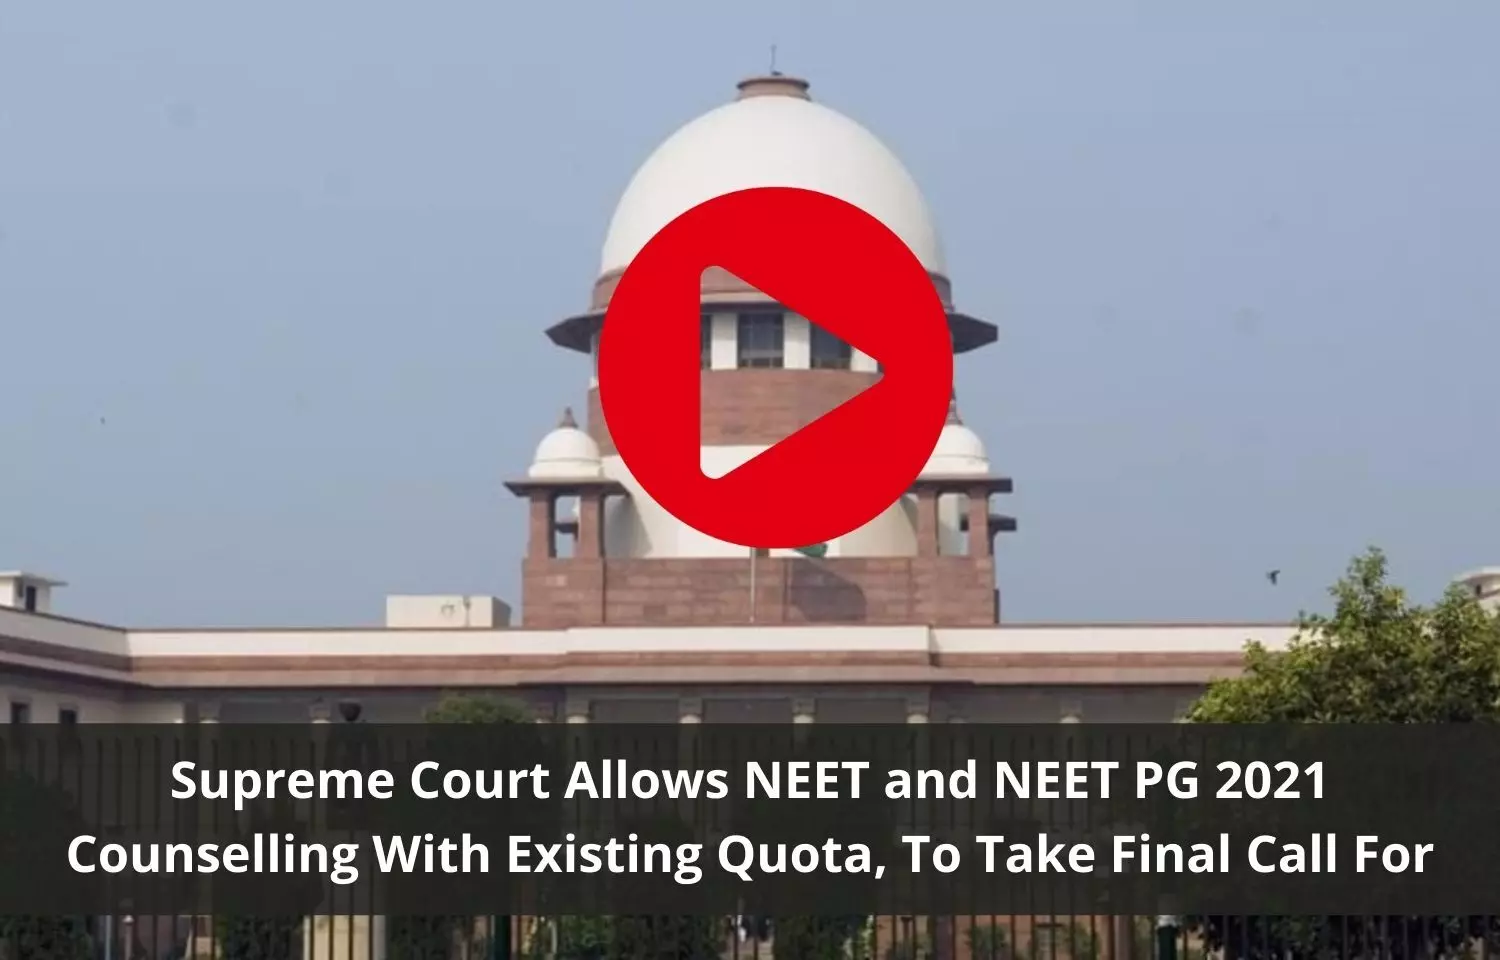 NEET and NEET PG 2021 Counselling With Existing Quota, final call for next year says Supreme Court